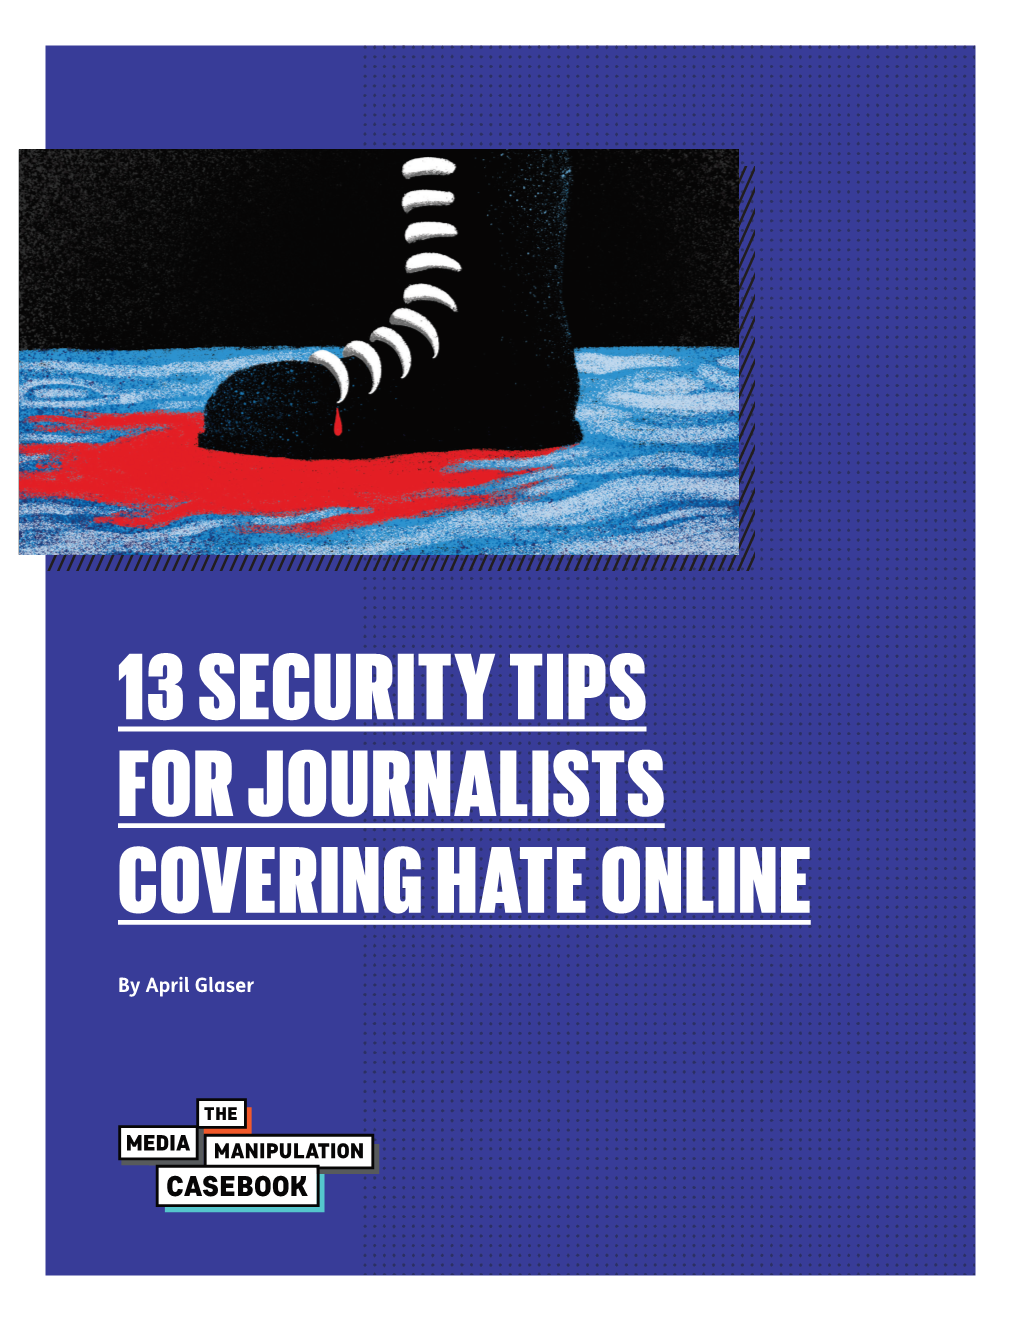 13 Security Tips for Journalists Covering Hate Online